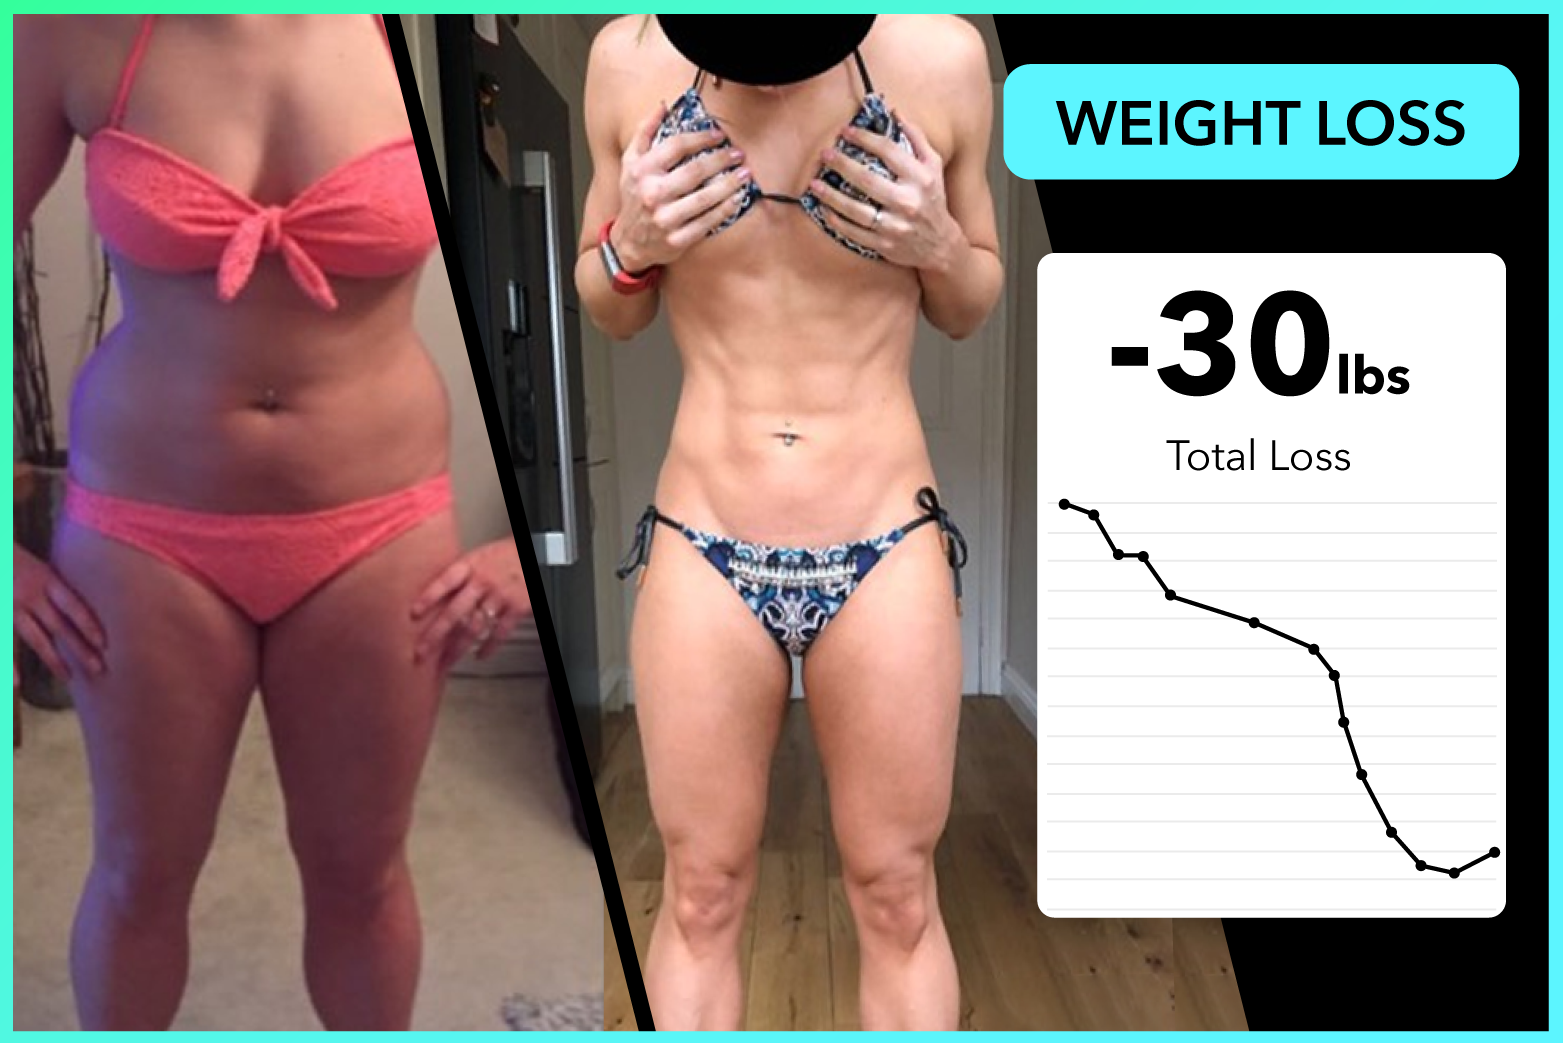 Charlotte lost 30lbs following the Life Plan